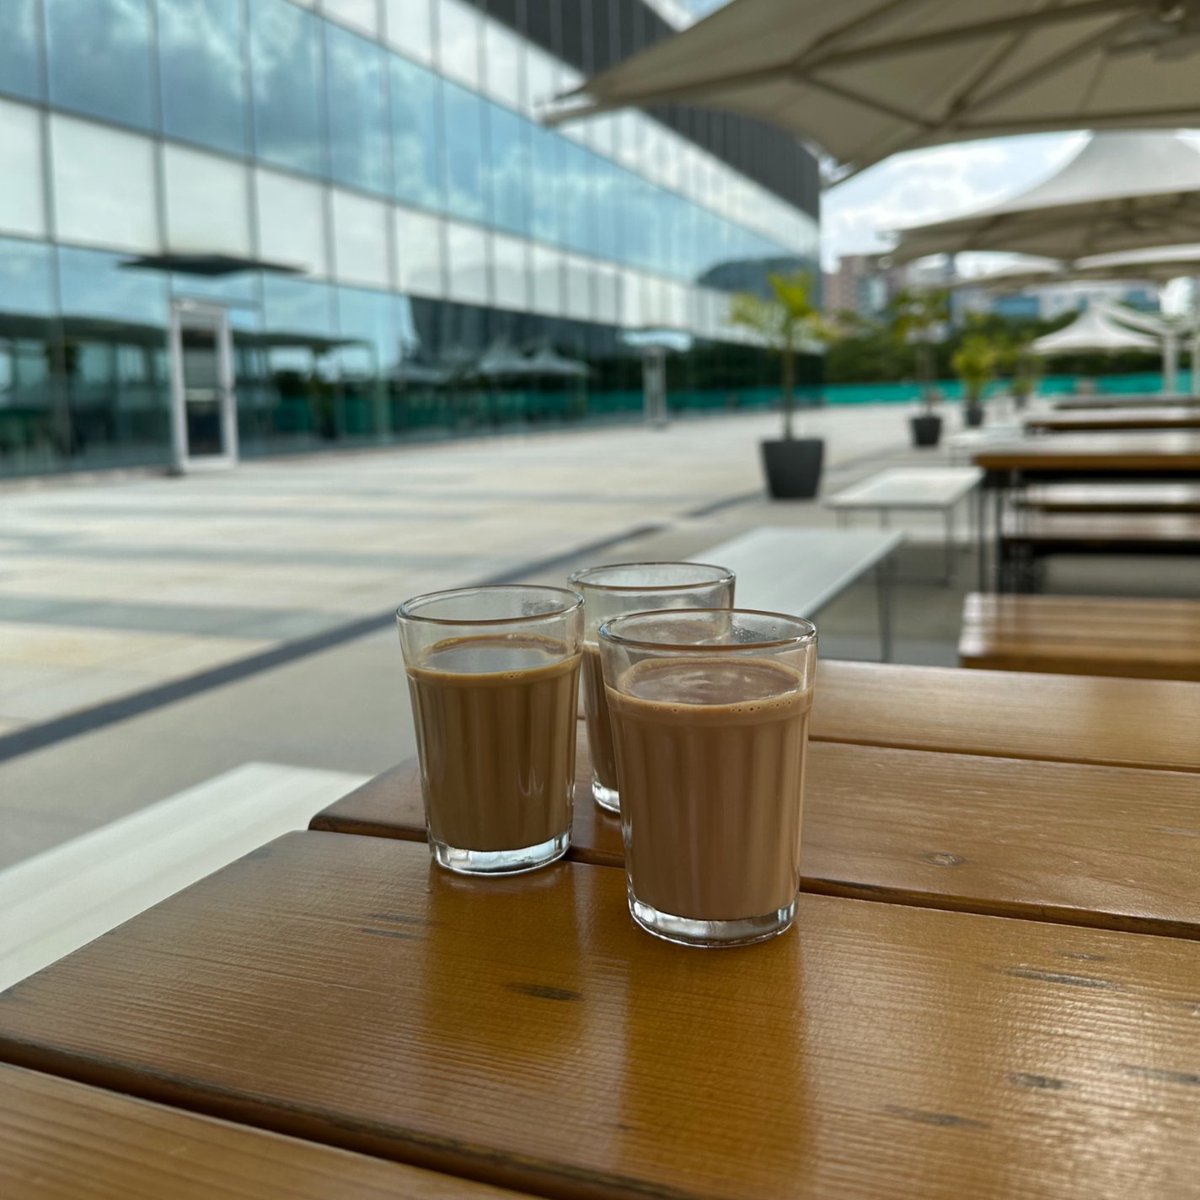 Since reopening last month, the @NetApp Bangalore campus has been abuzz with activity. Employees are enjoying camaraderie, team lunches, and perks like the new live-filter coffee station.

@NetAppIndia #LifeAtNetApp #NetApp #Bangalore